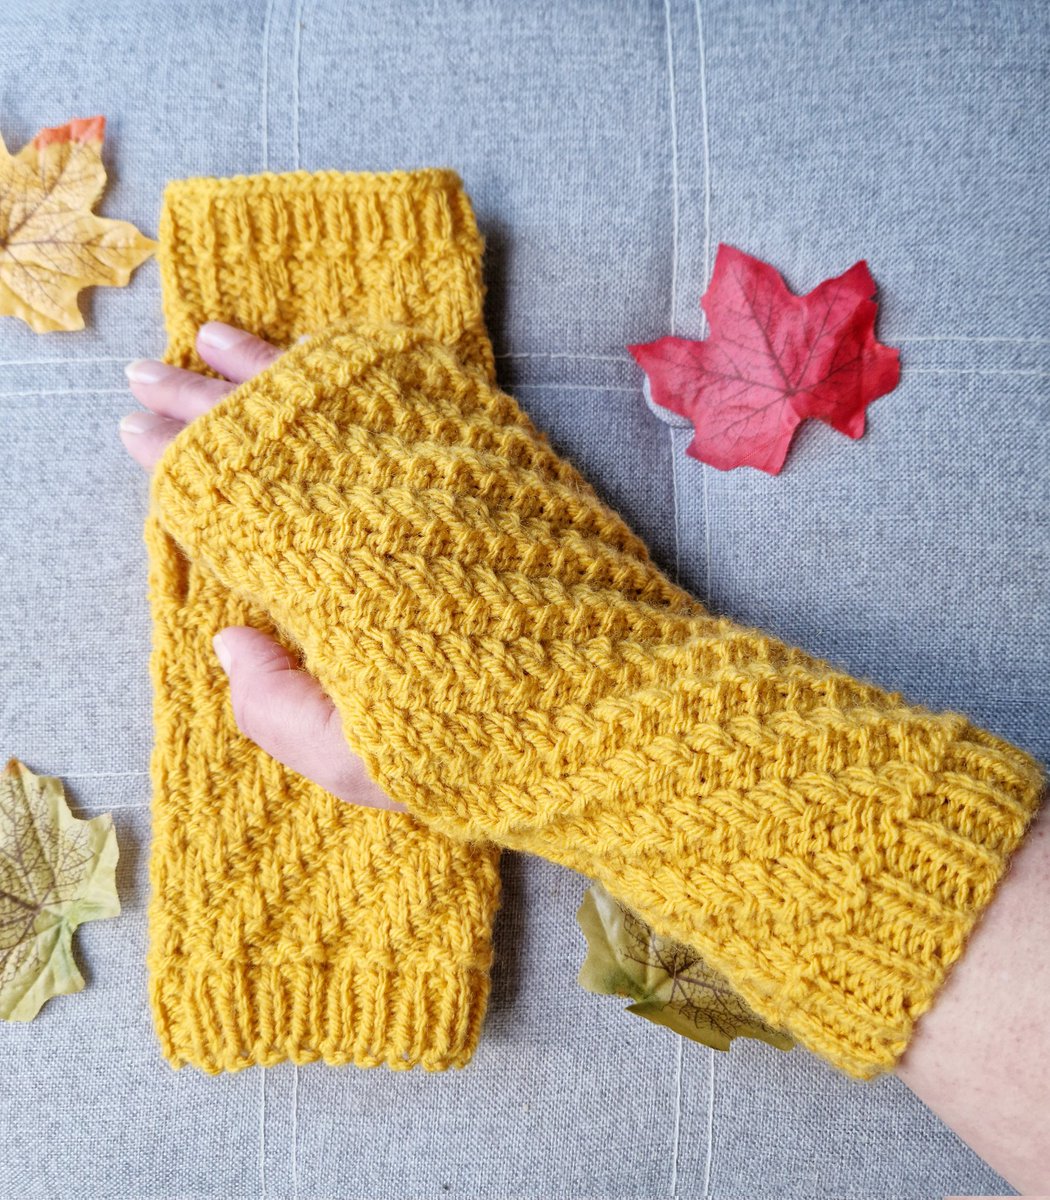 Need some colour in your life? These sunny, diagonal rib wristwarmers are sure to brighten your day. Now with free UK p&p

etsy.com/uk/listing/157…

#ukgifthour #ukgiftam #shopindie #gifts #etsy